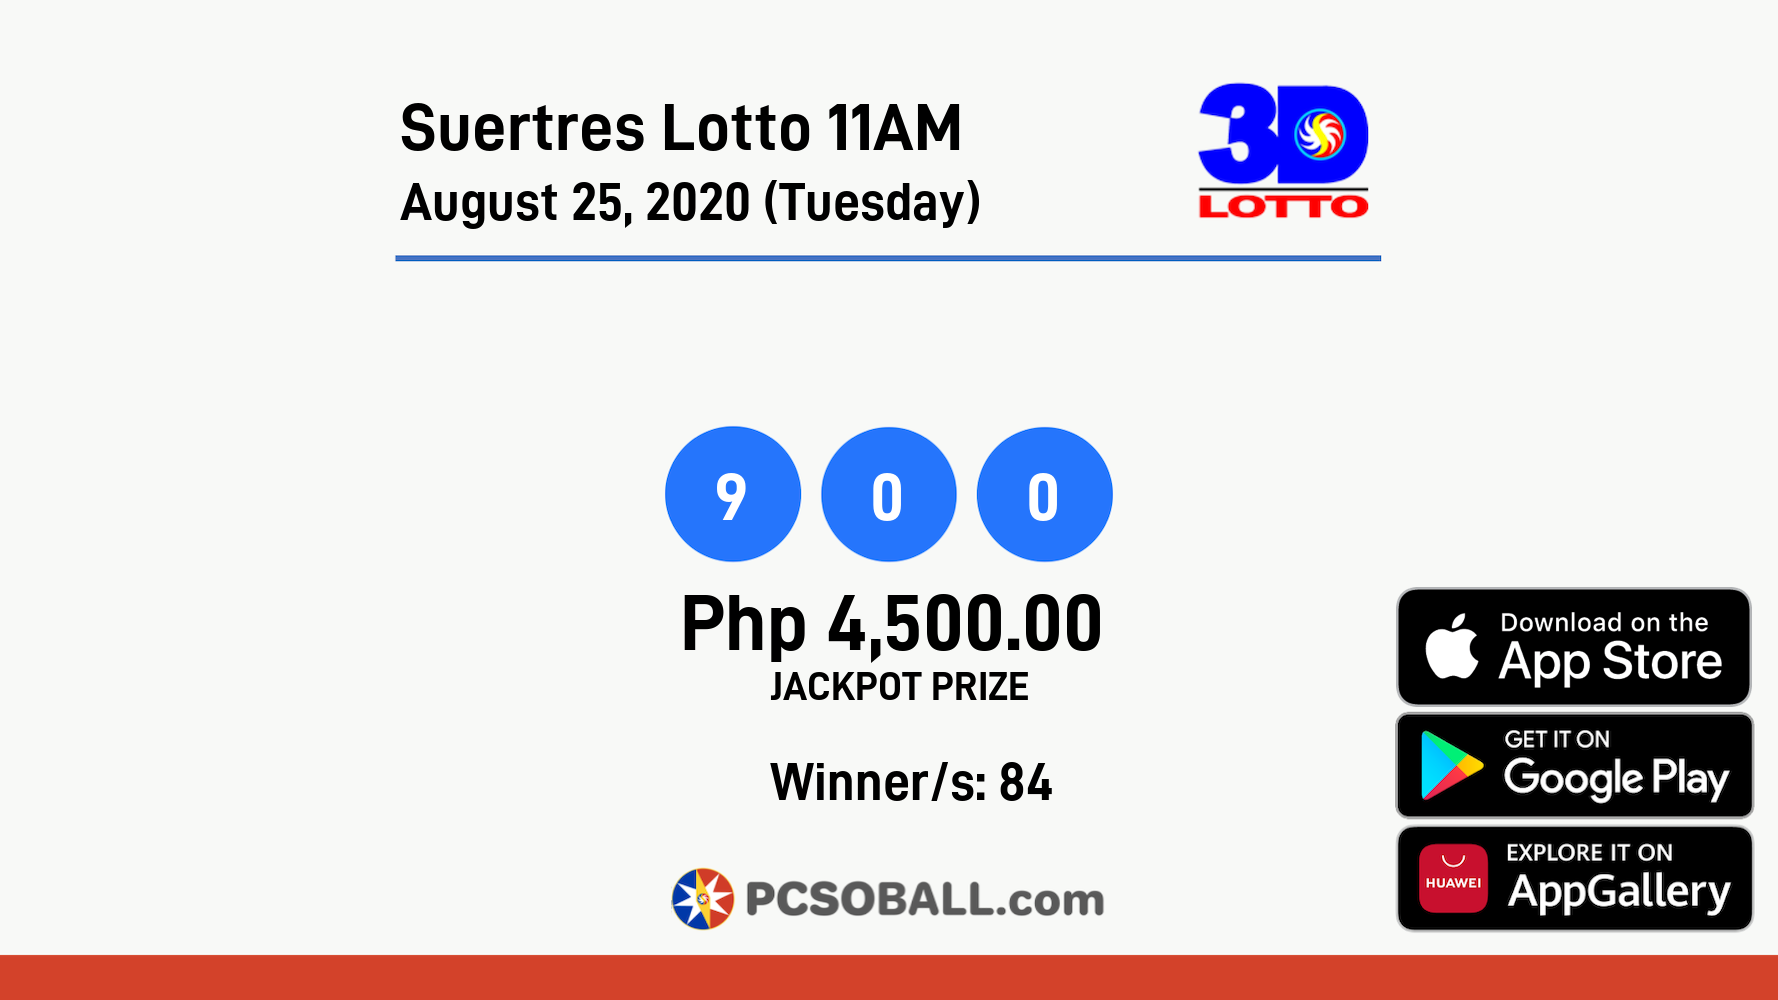 Suertres Lotto 11AM August 25, 2020 (Tuesday) Result